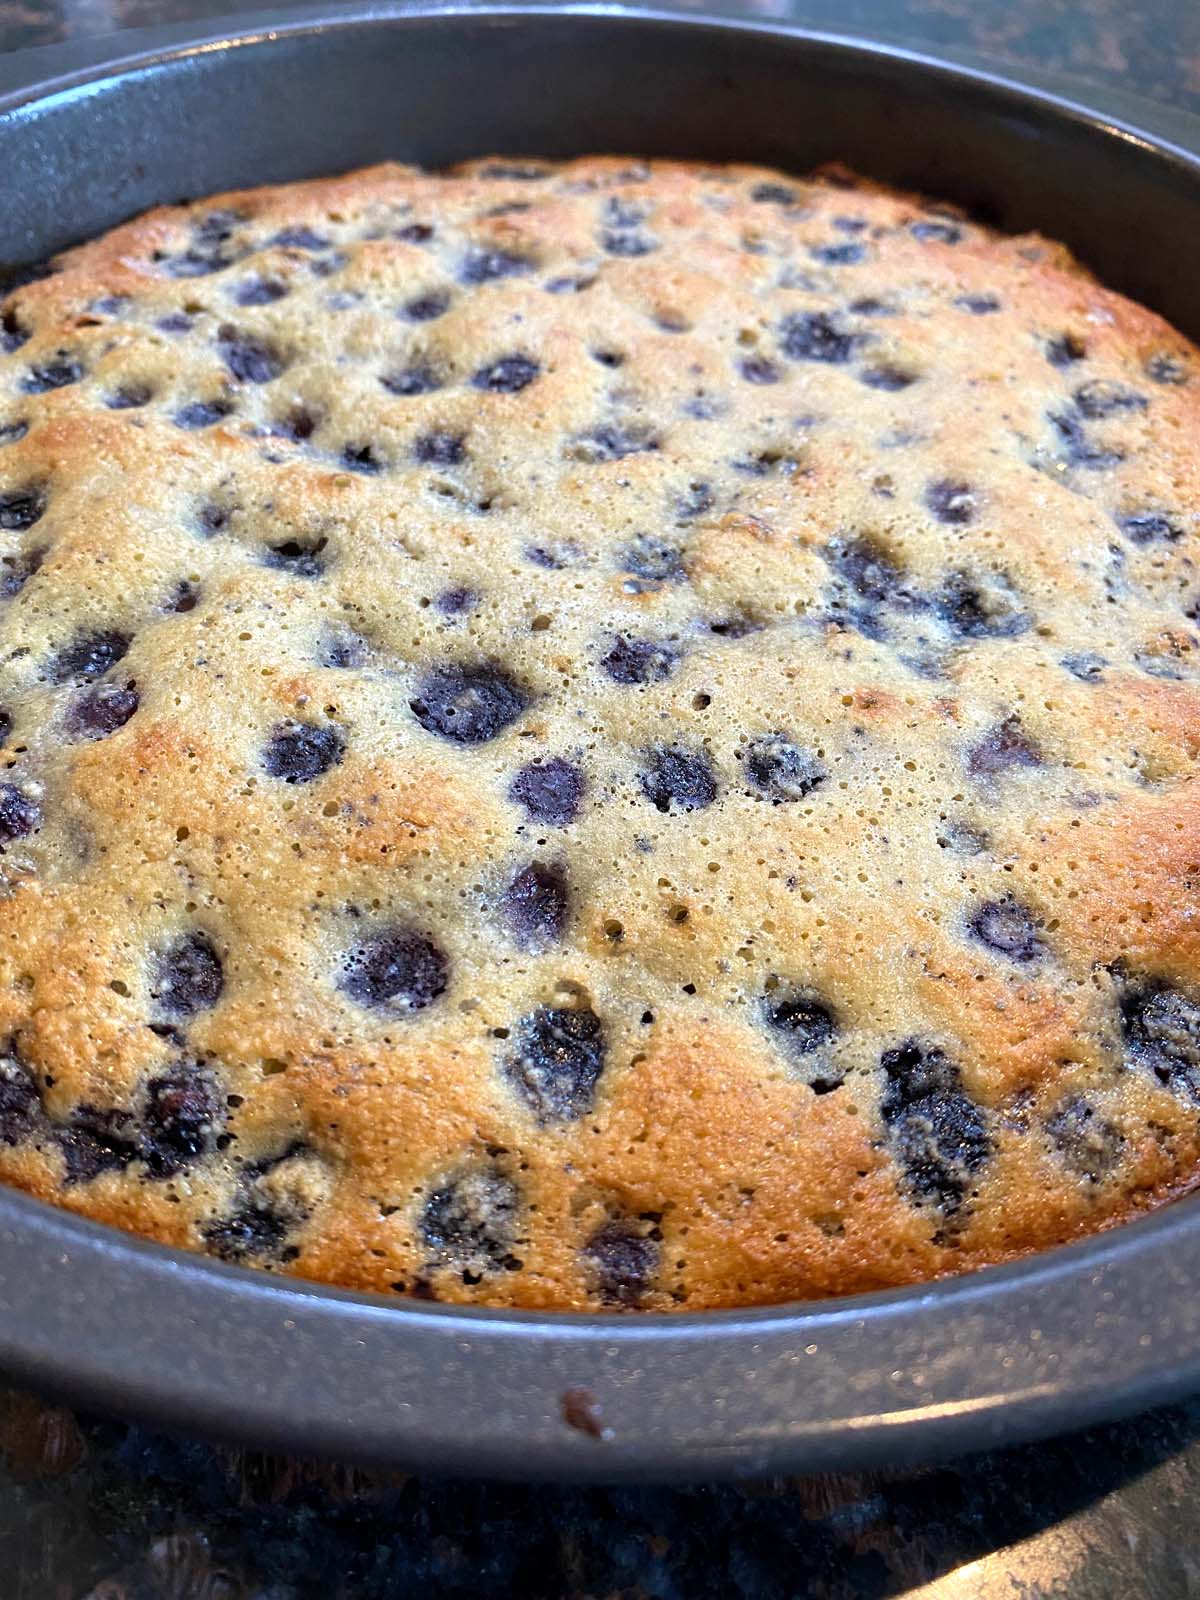 Baked gluten free blueberry cake in the pan.